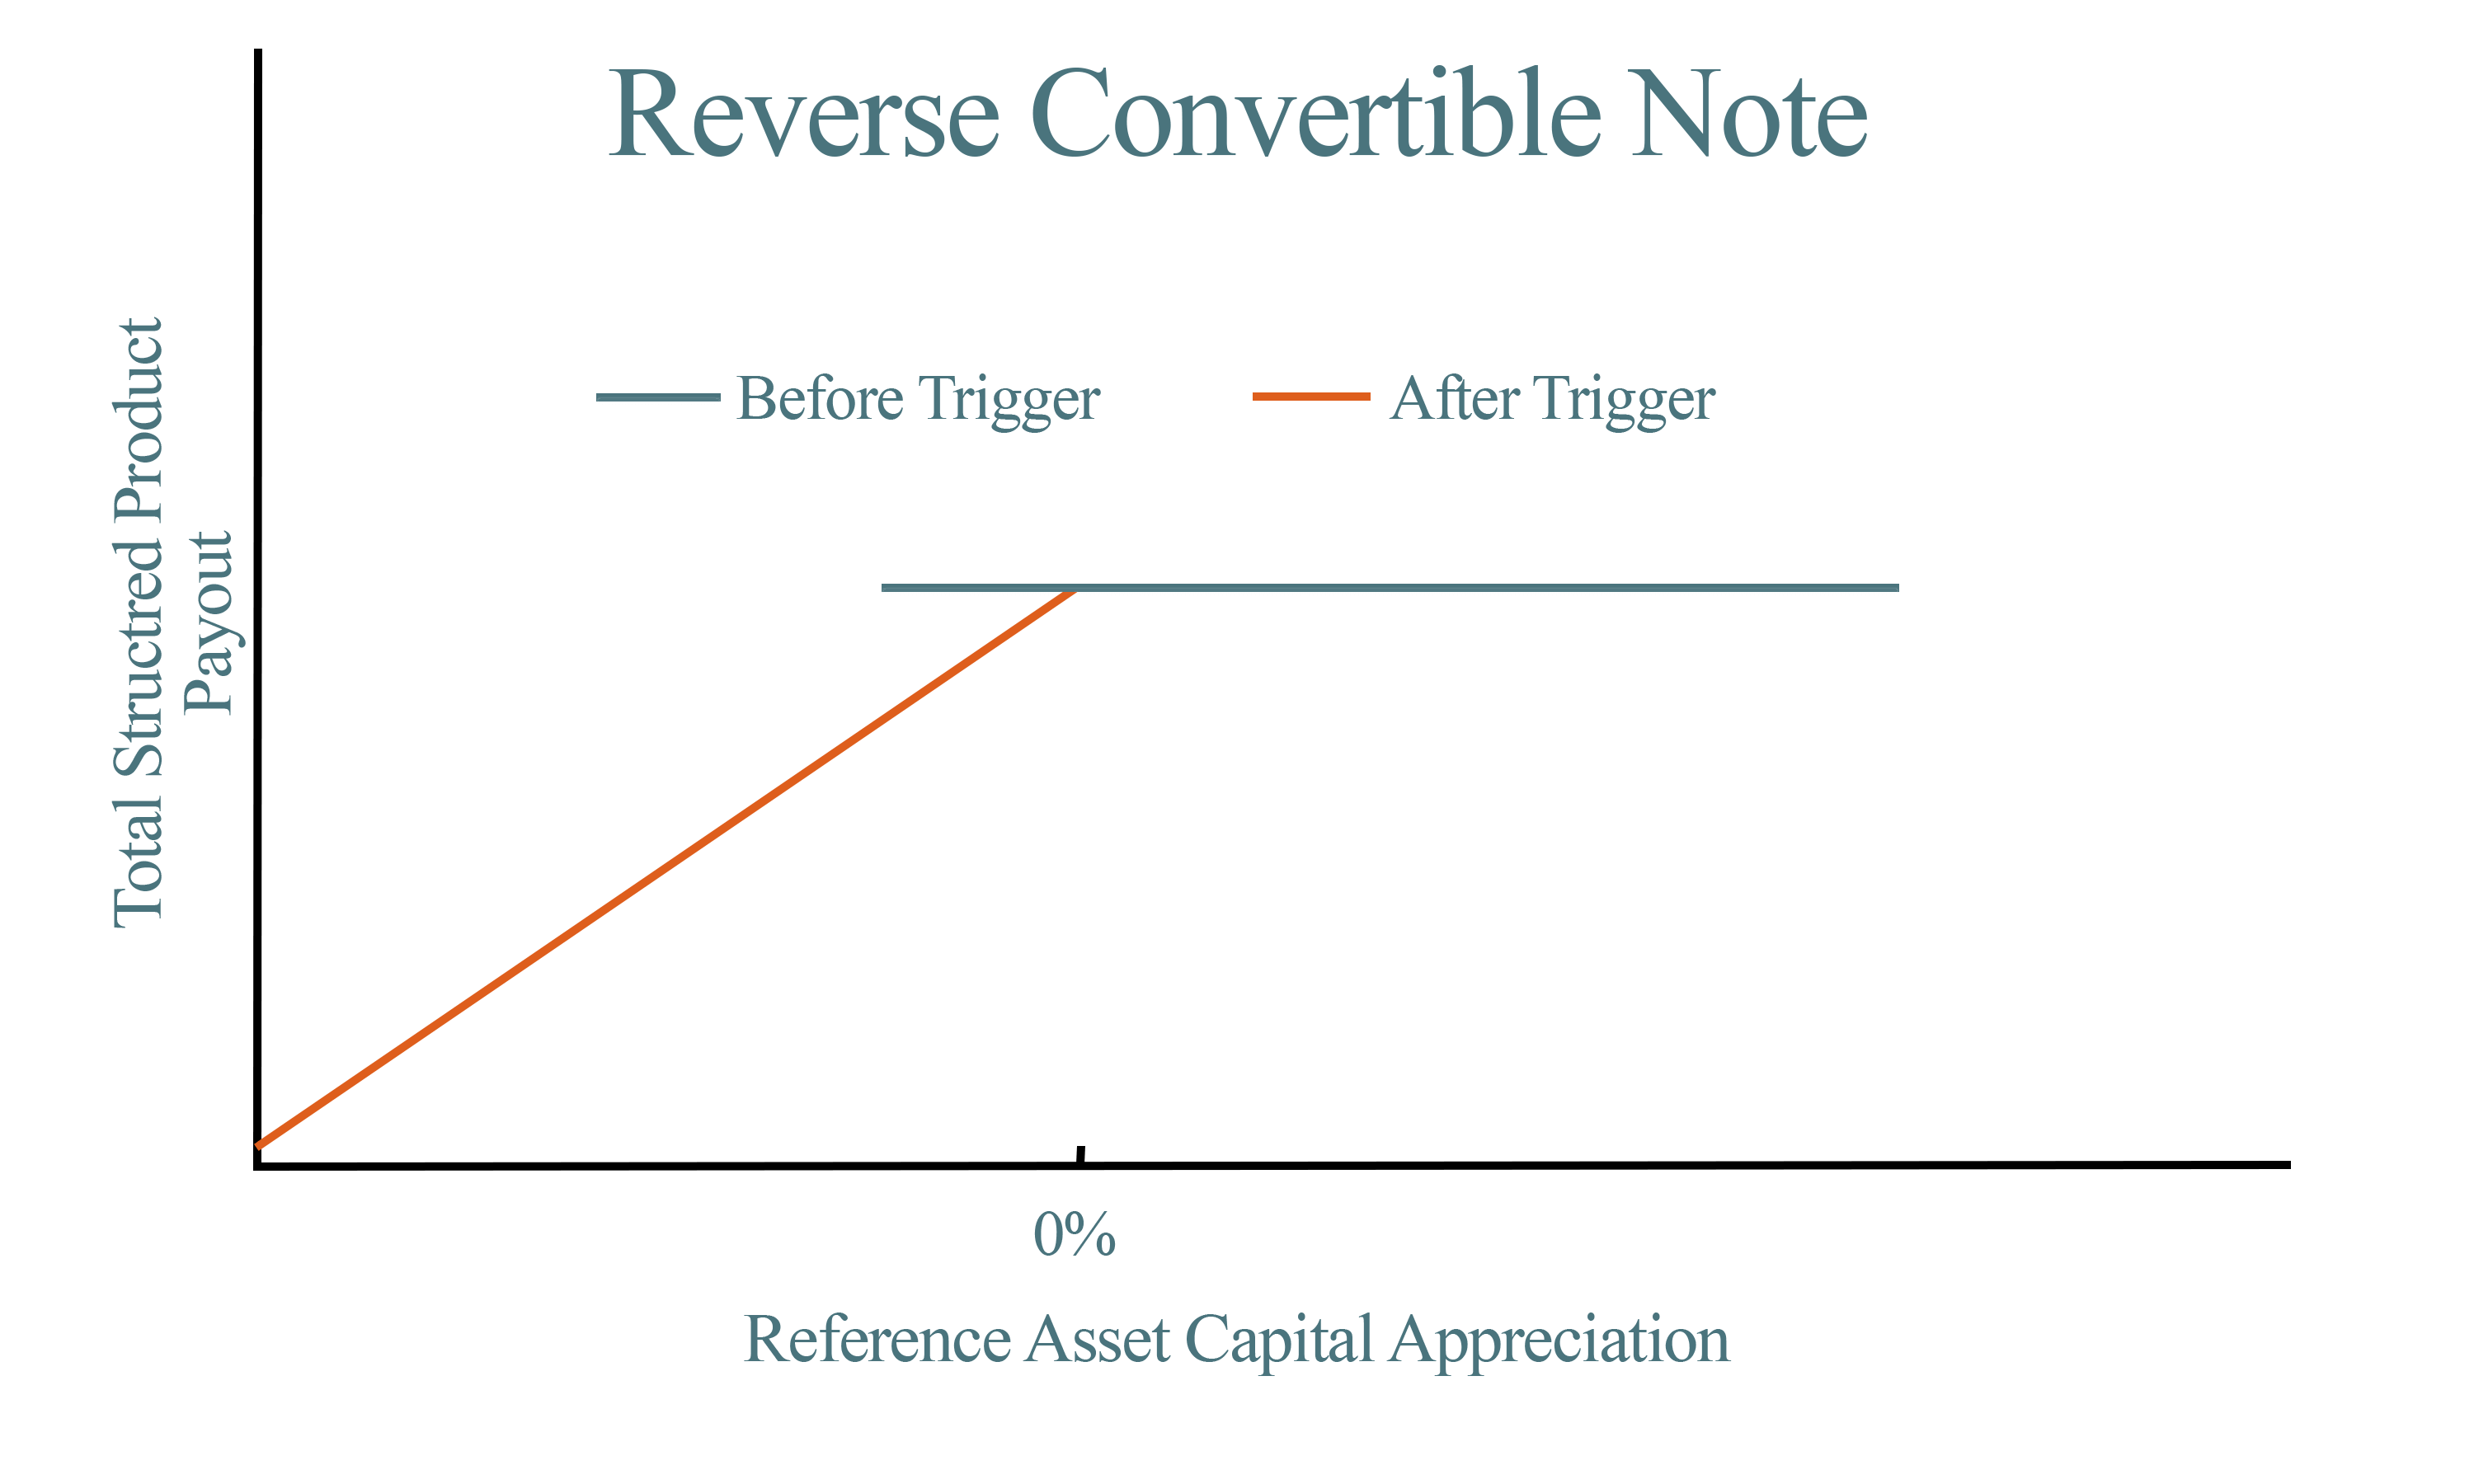 A graph demonstrating payout over capital appreciation for Reverse Convertibles